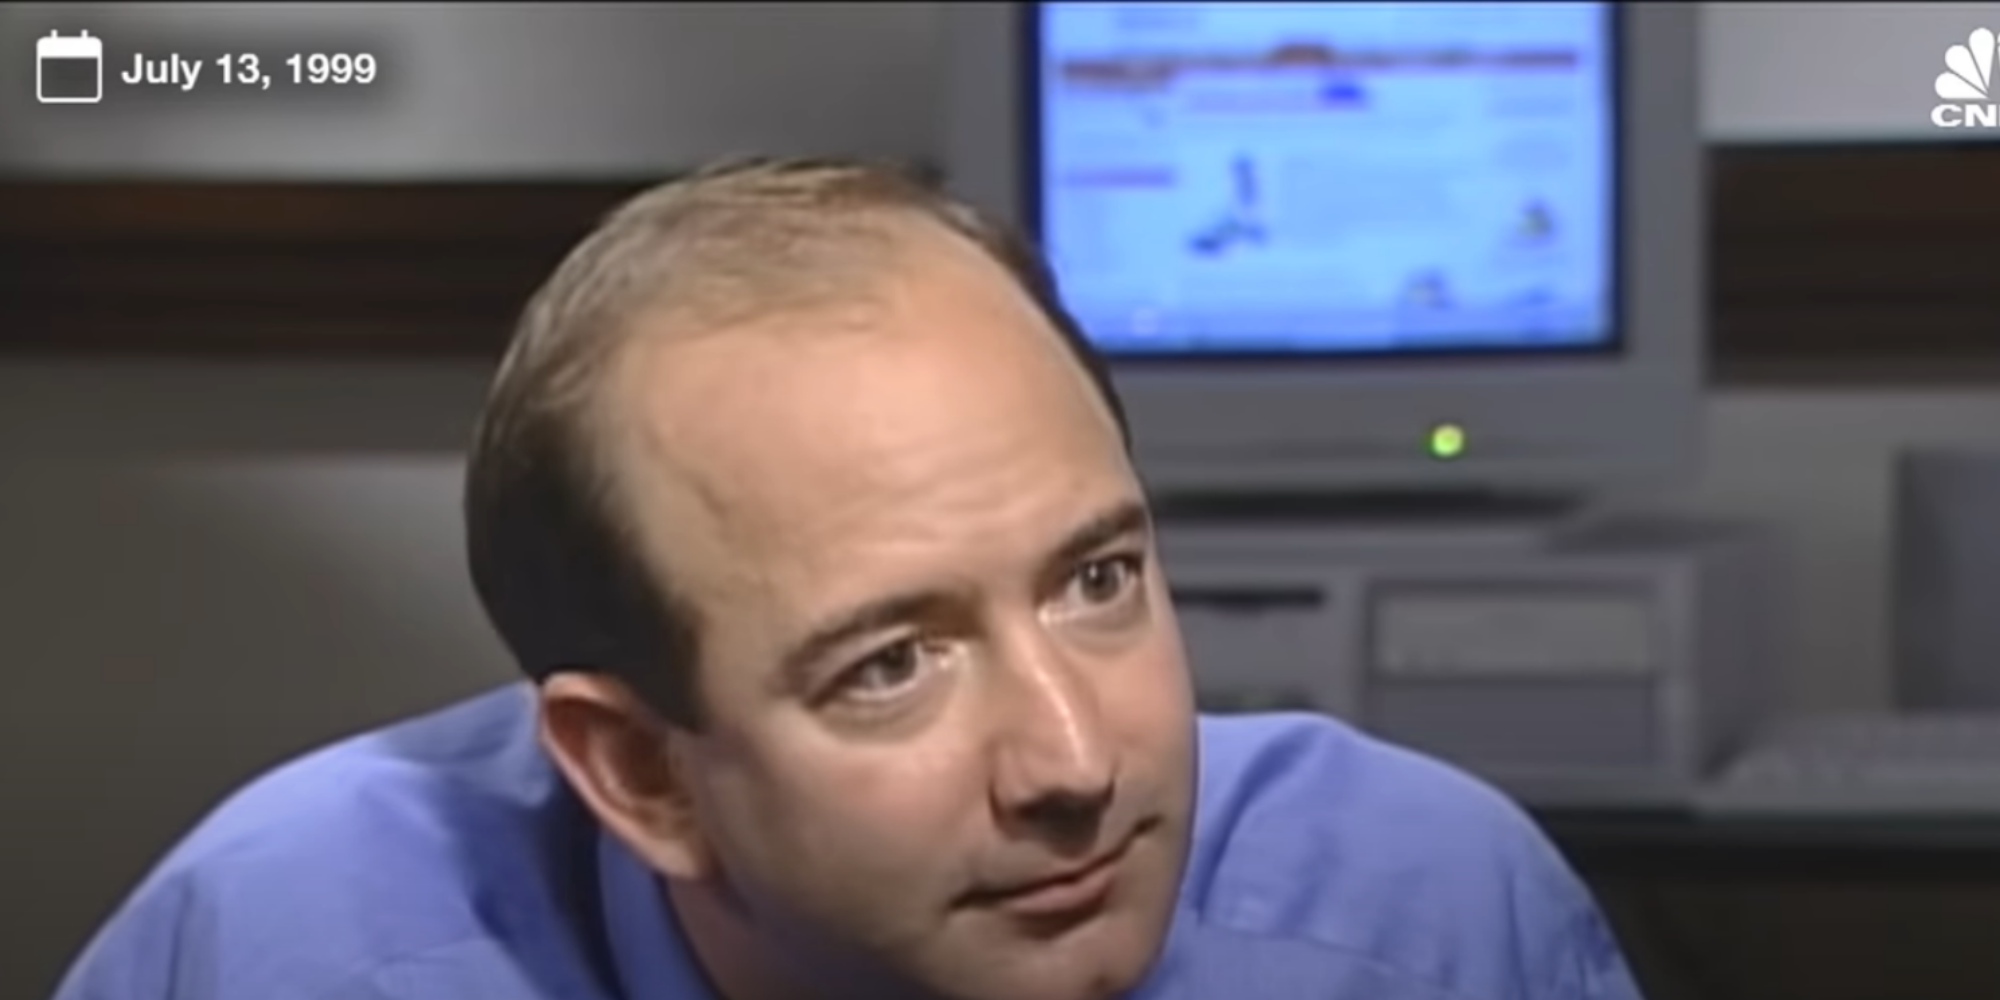 Jeff Bezos: Clip of Amazon owner talking about online shopping in 1999